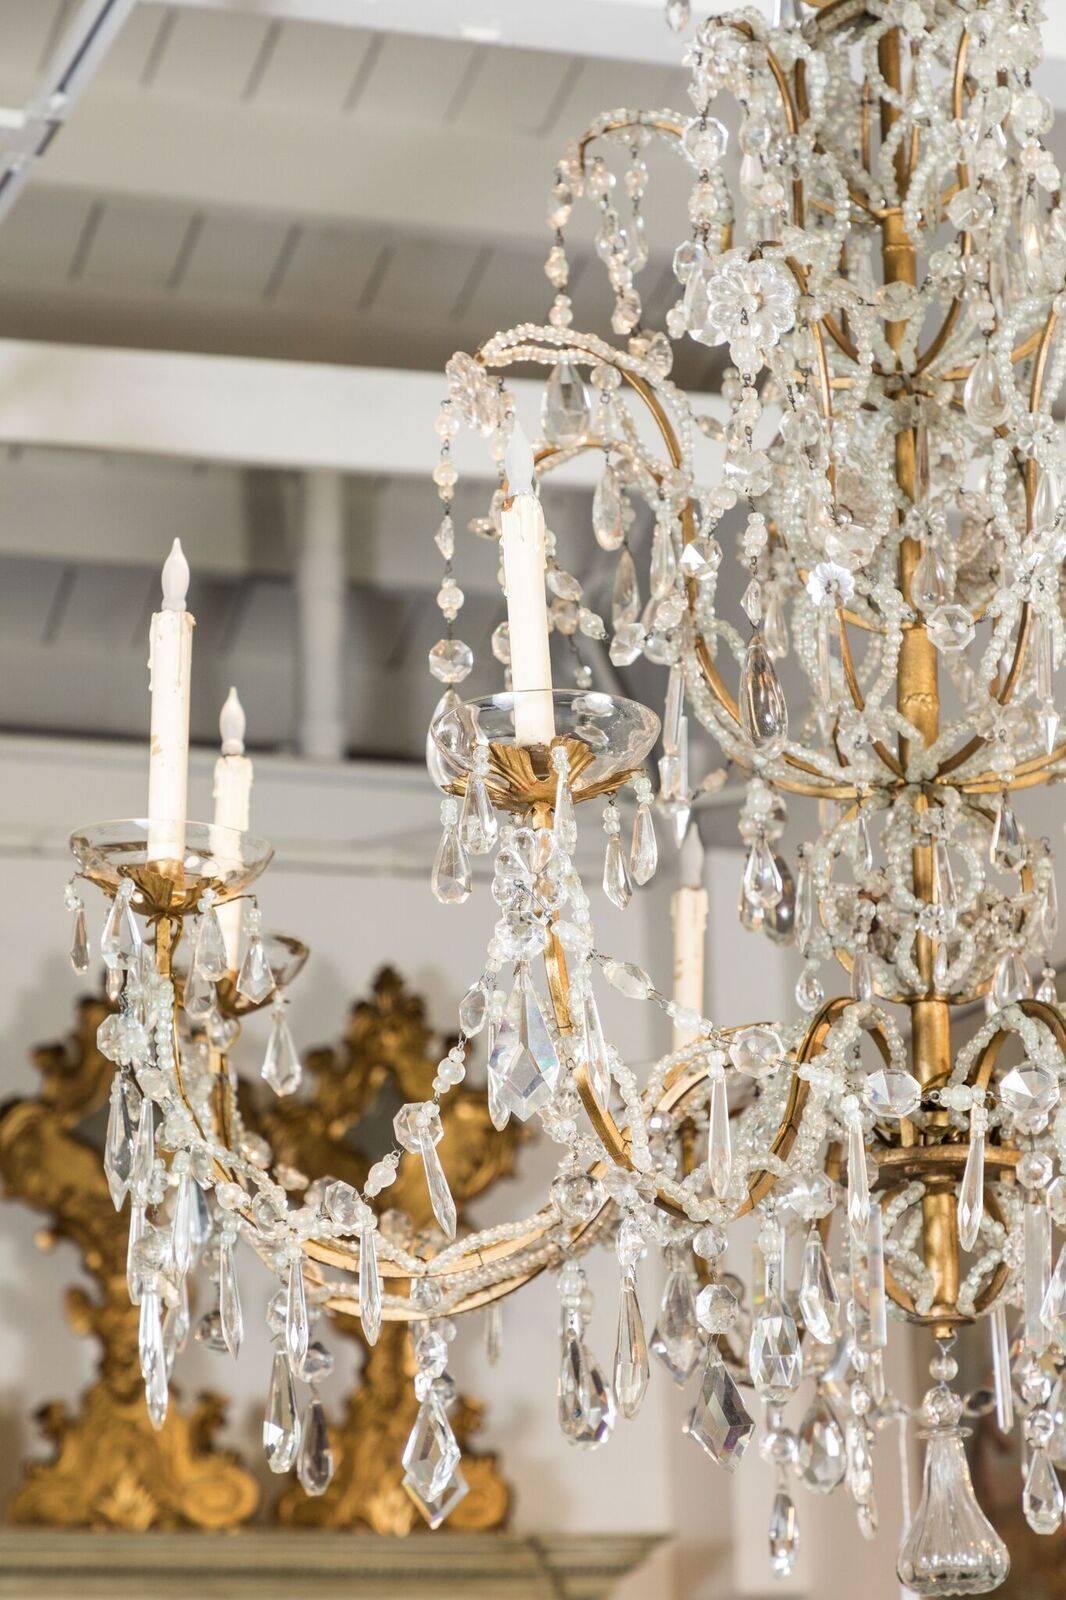 Stunning, eight-light, Italian chandelier featuring hand-beaded strands that mirror the gilt bronze frames. The whole embellished with generous amounts of crystal.